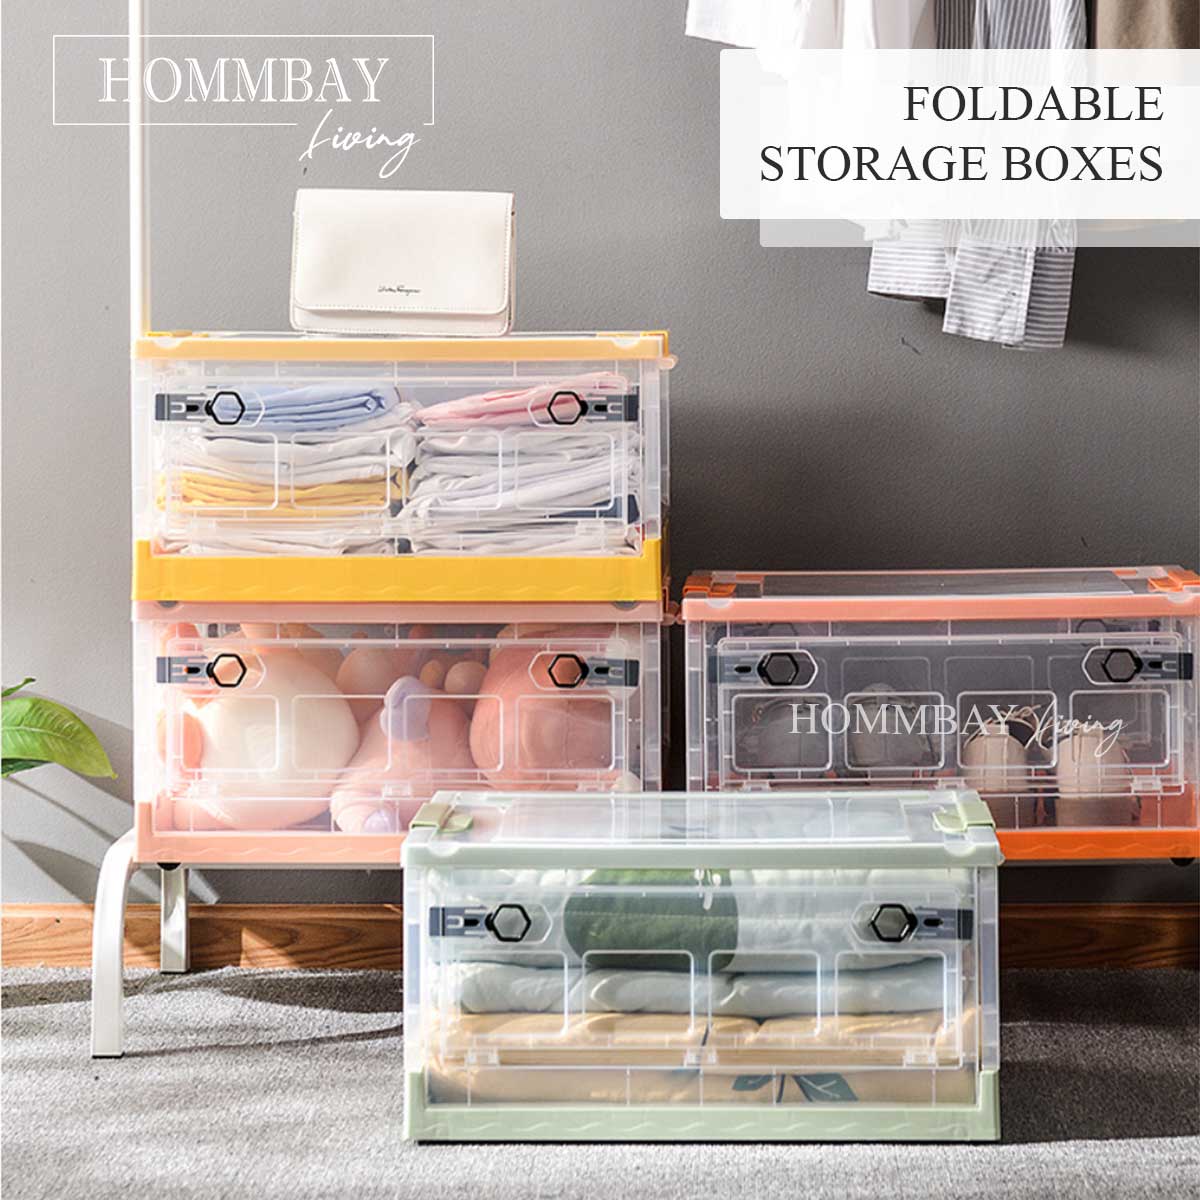 Homall Collapsible Storage Bins with Lids, 19 gal Folding Storage